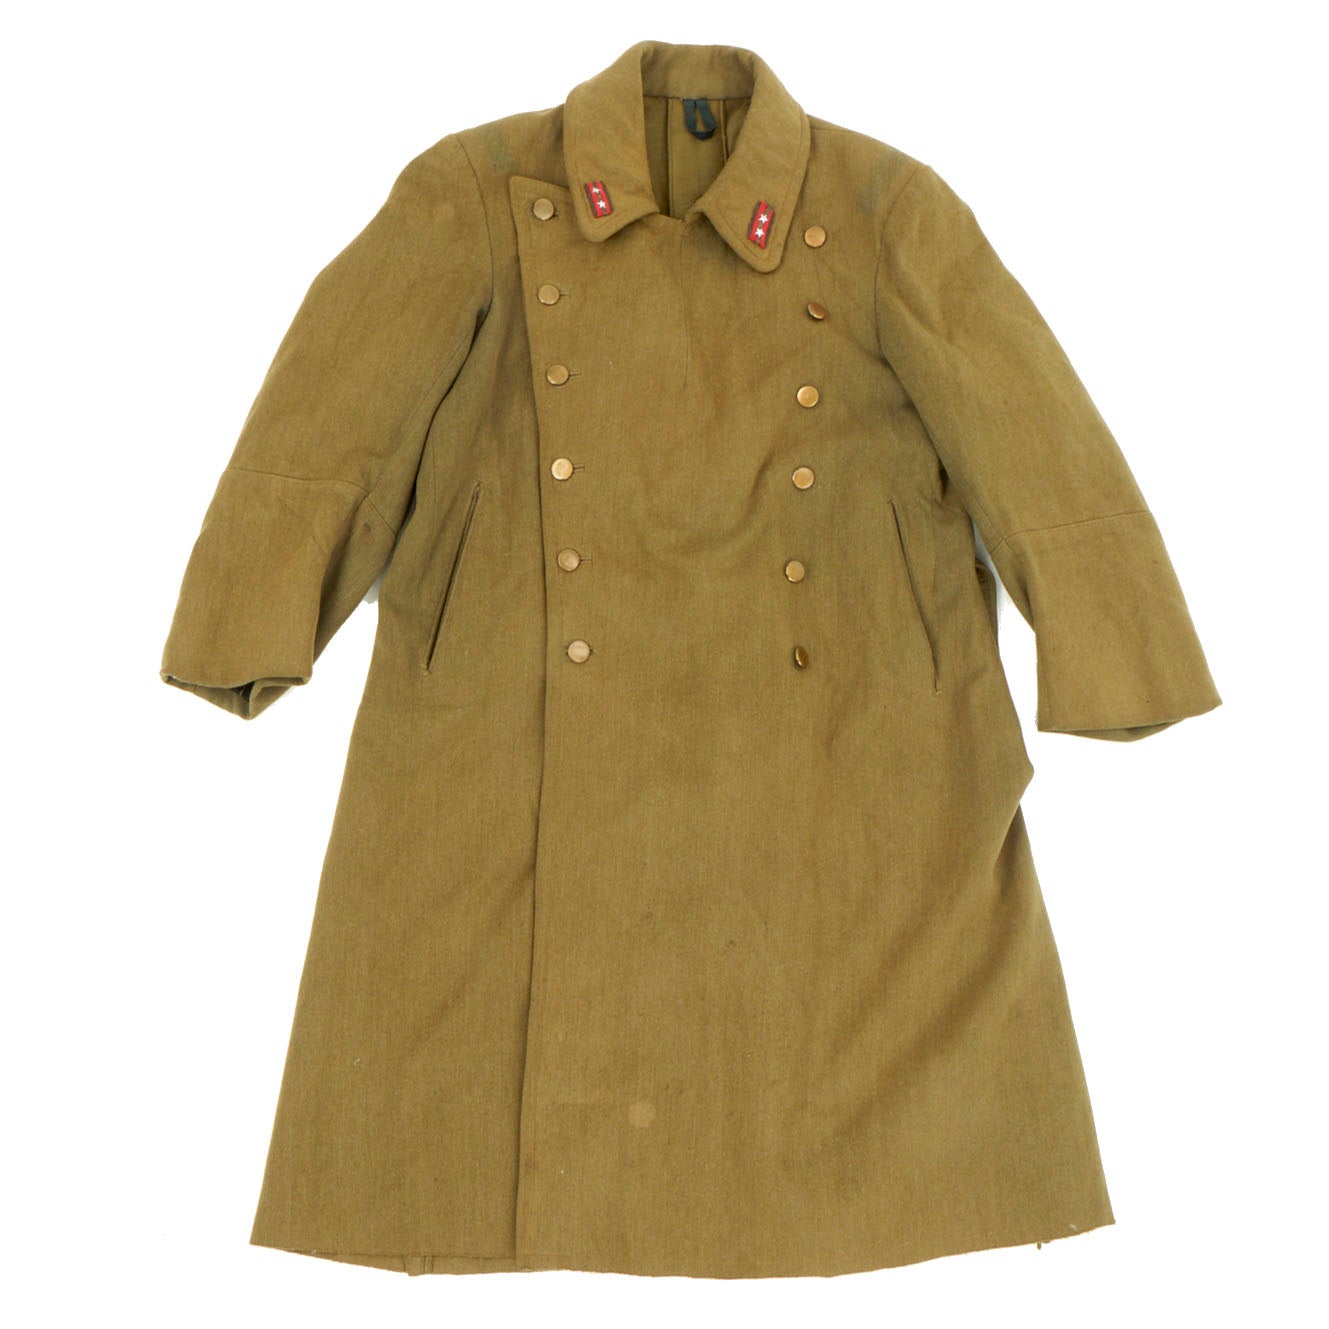 Original Japanese WWII Imperial Japanese Army Officer Wool Overcoat ...